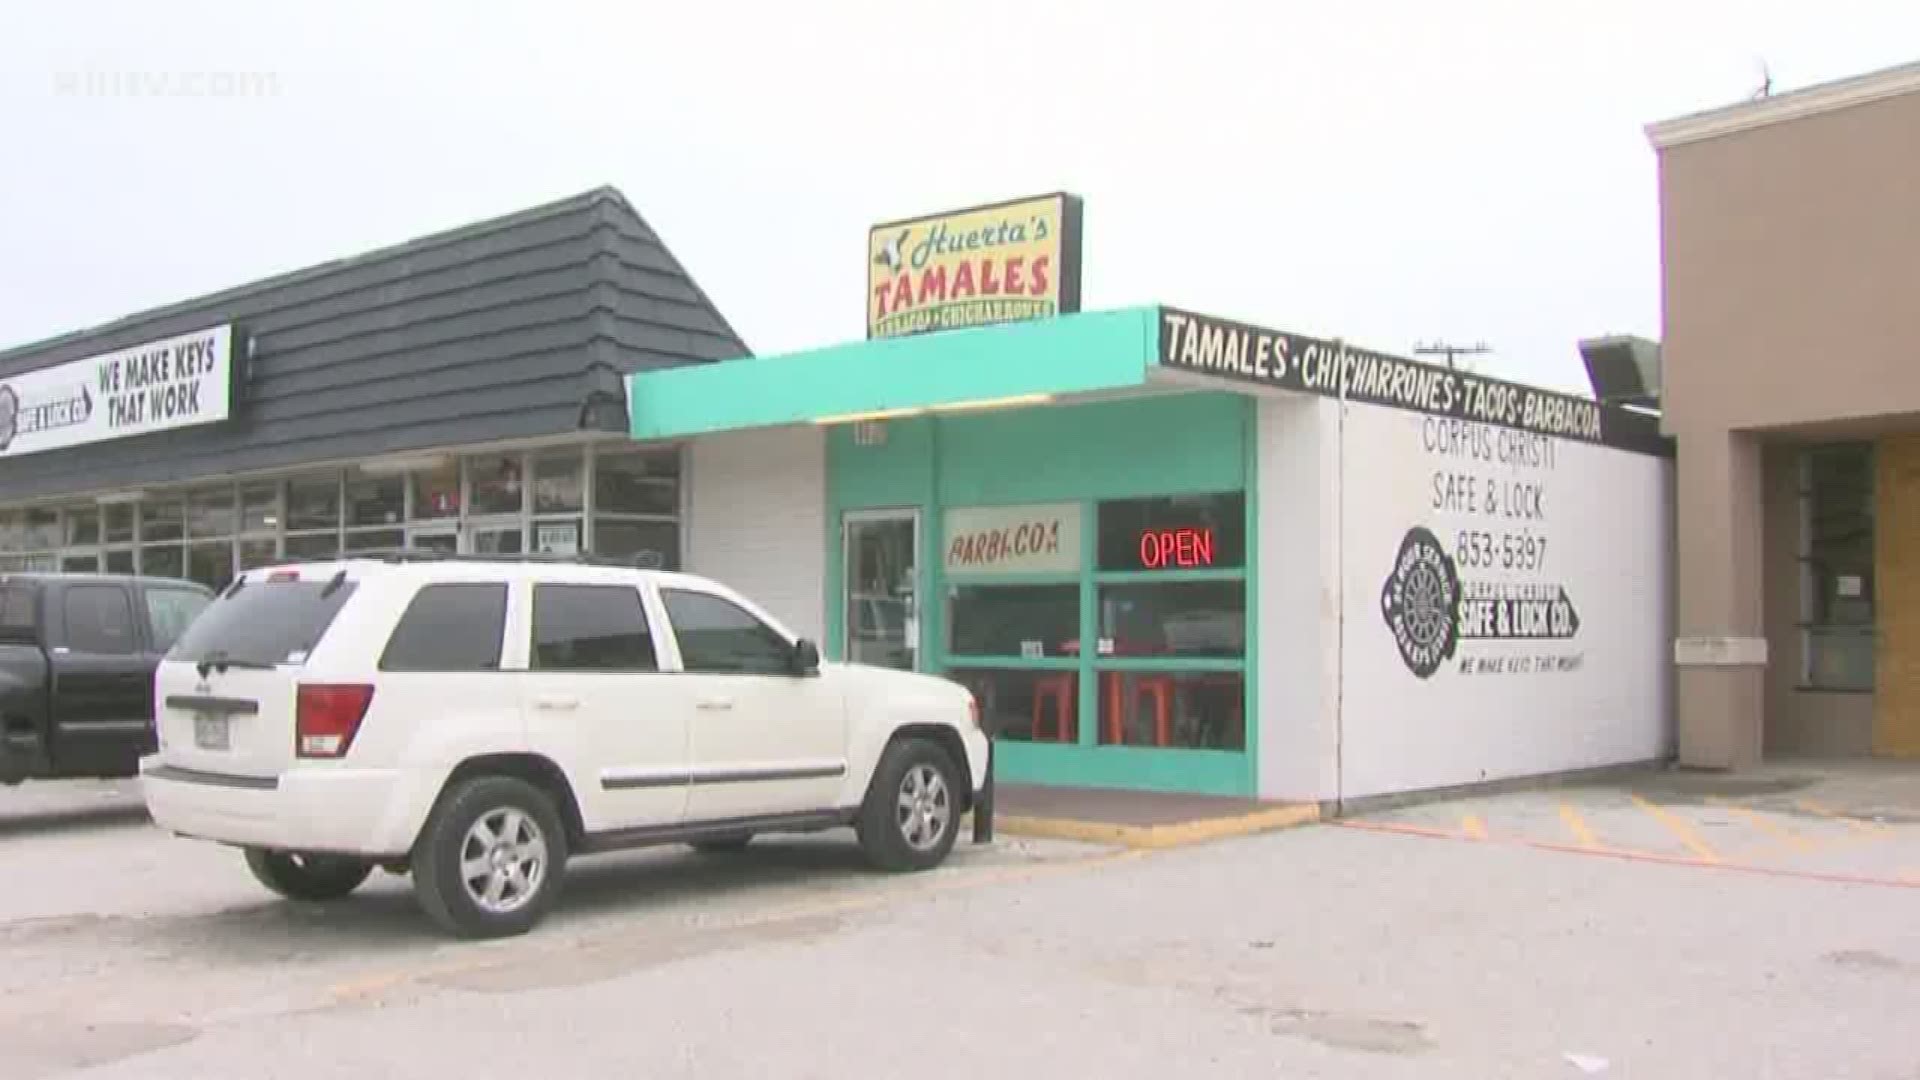 For many Coastal Bend residents, a holiday tradition during Thanksgiving and Christmas is tamales but come Dec. 31 one local tamale kitchen will be closing its doors.